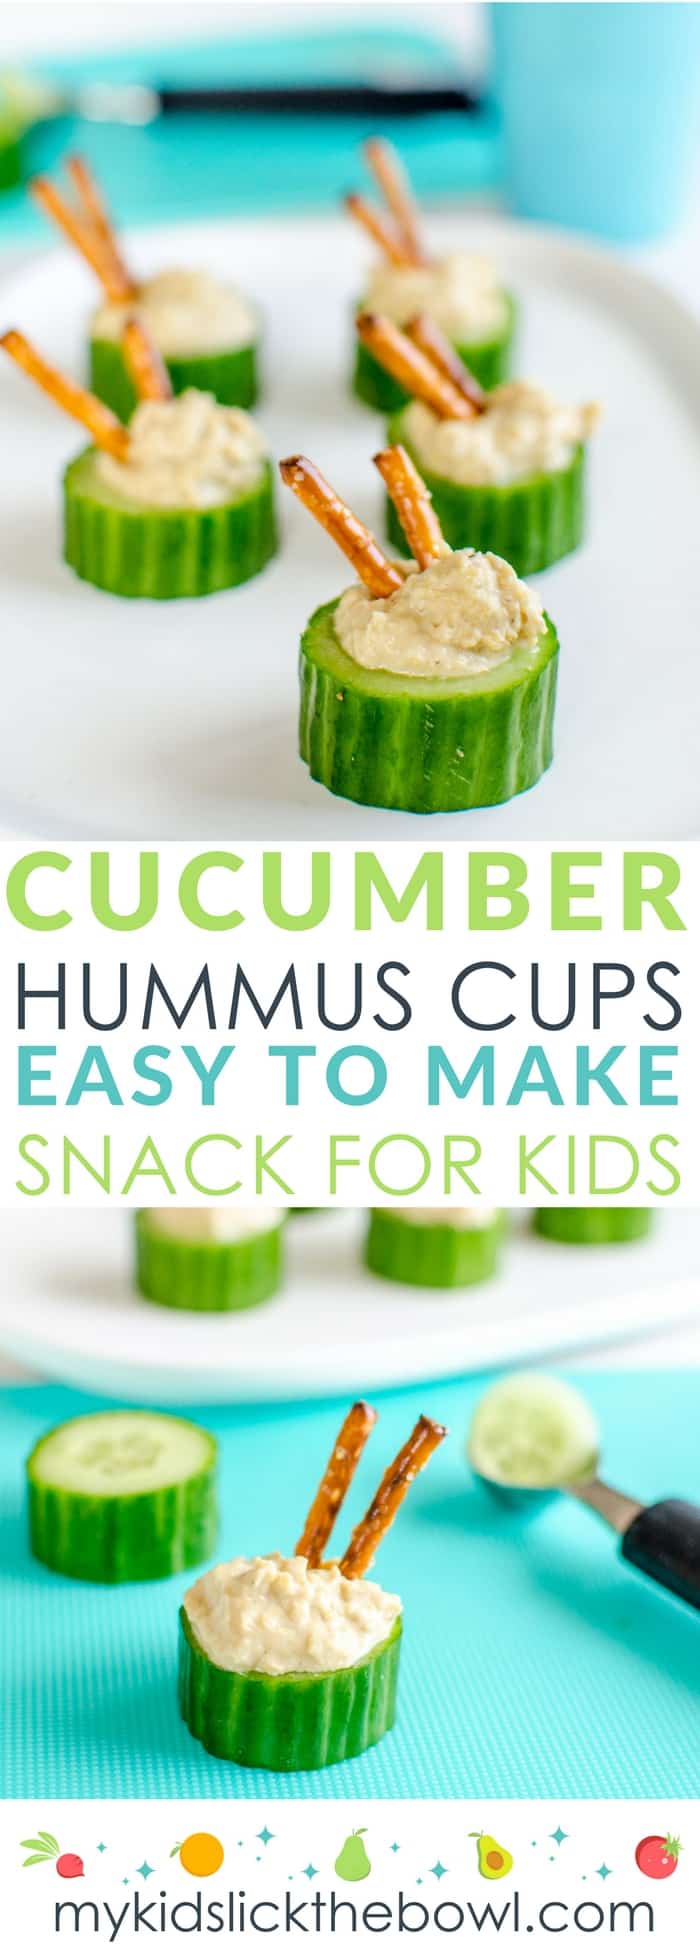 Cucumber hummus cups an easy healthy snack idea for kids, could also be used for appetizers and finger foods #healthysnack #kidsfood